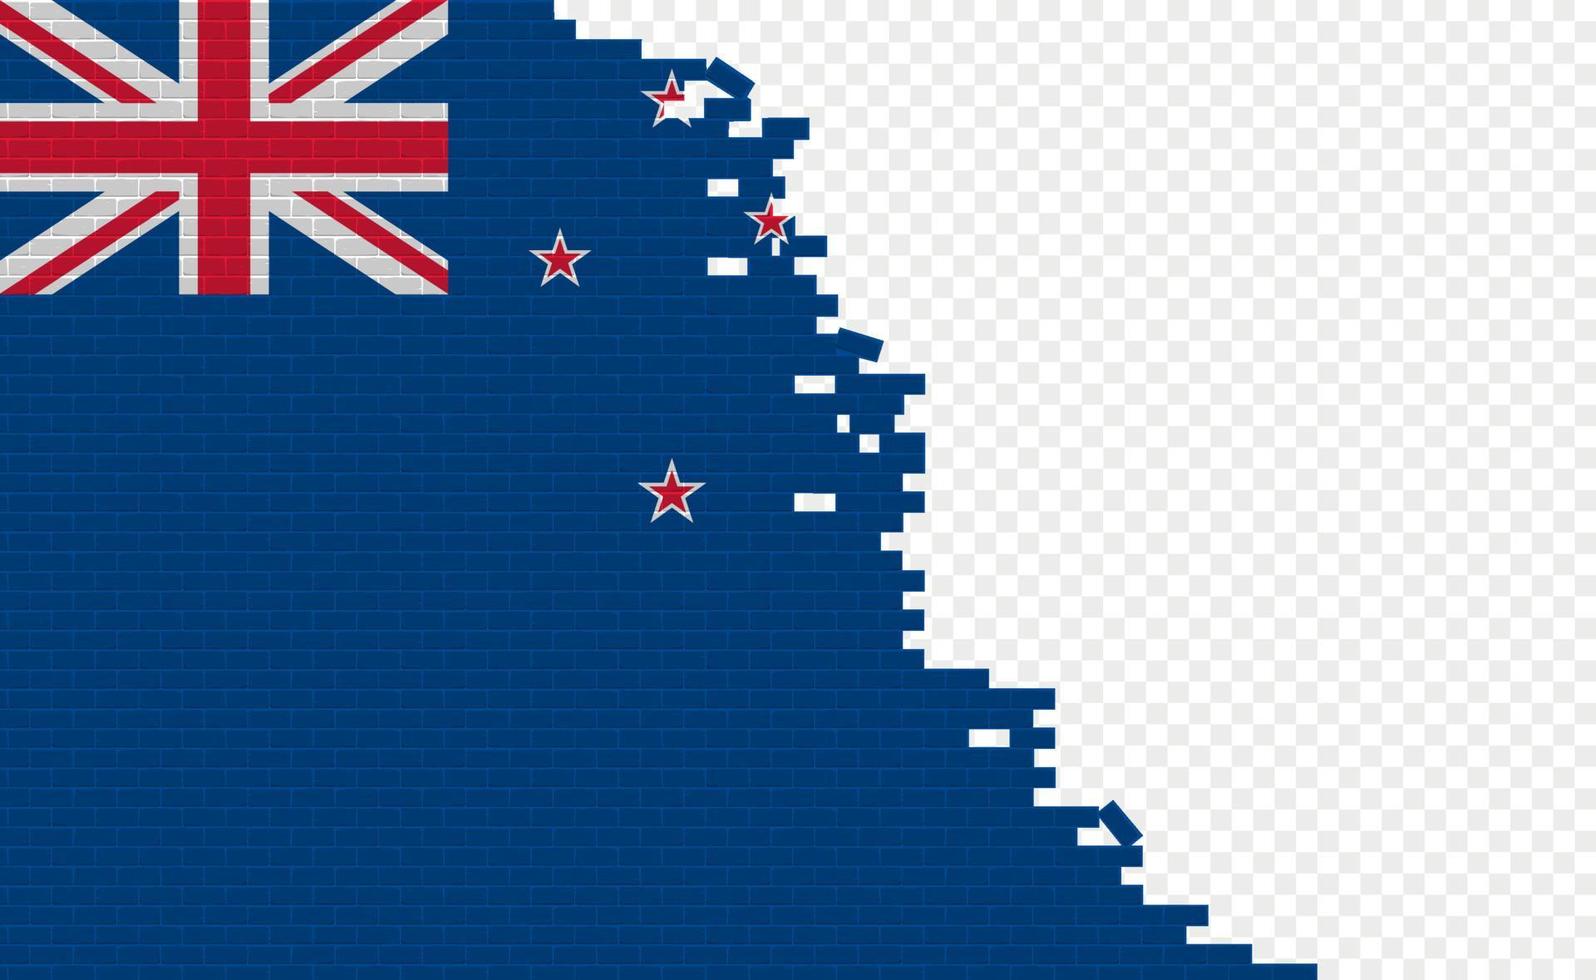 New Zealand flag on broken brick wall. Empty flag field of another country. Country comparison. Easy editing and vector in groups.